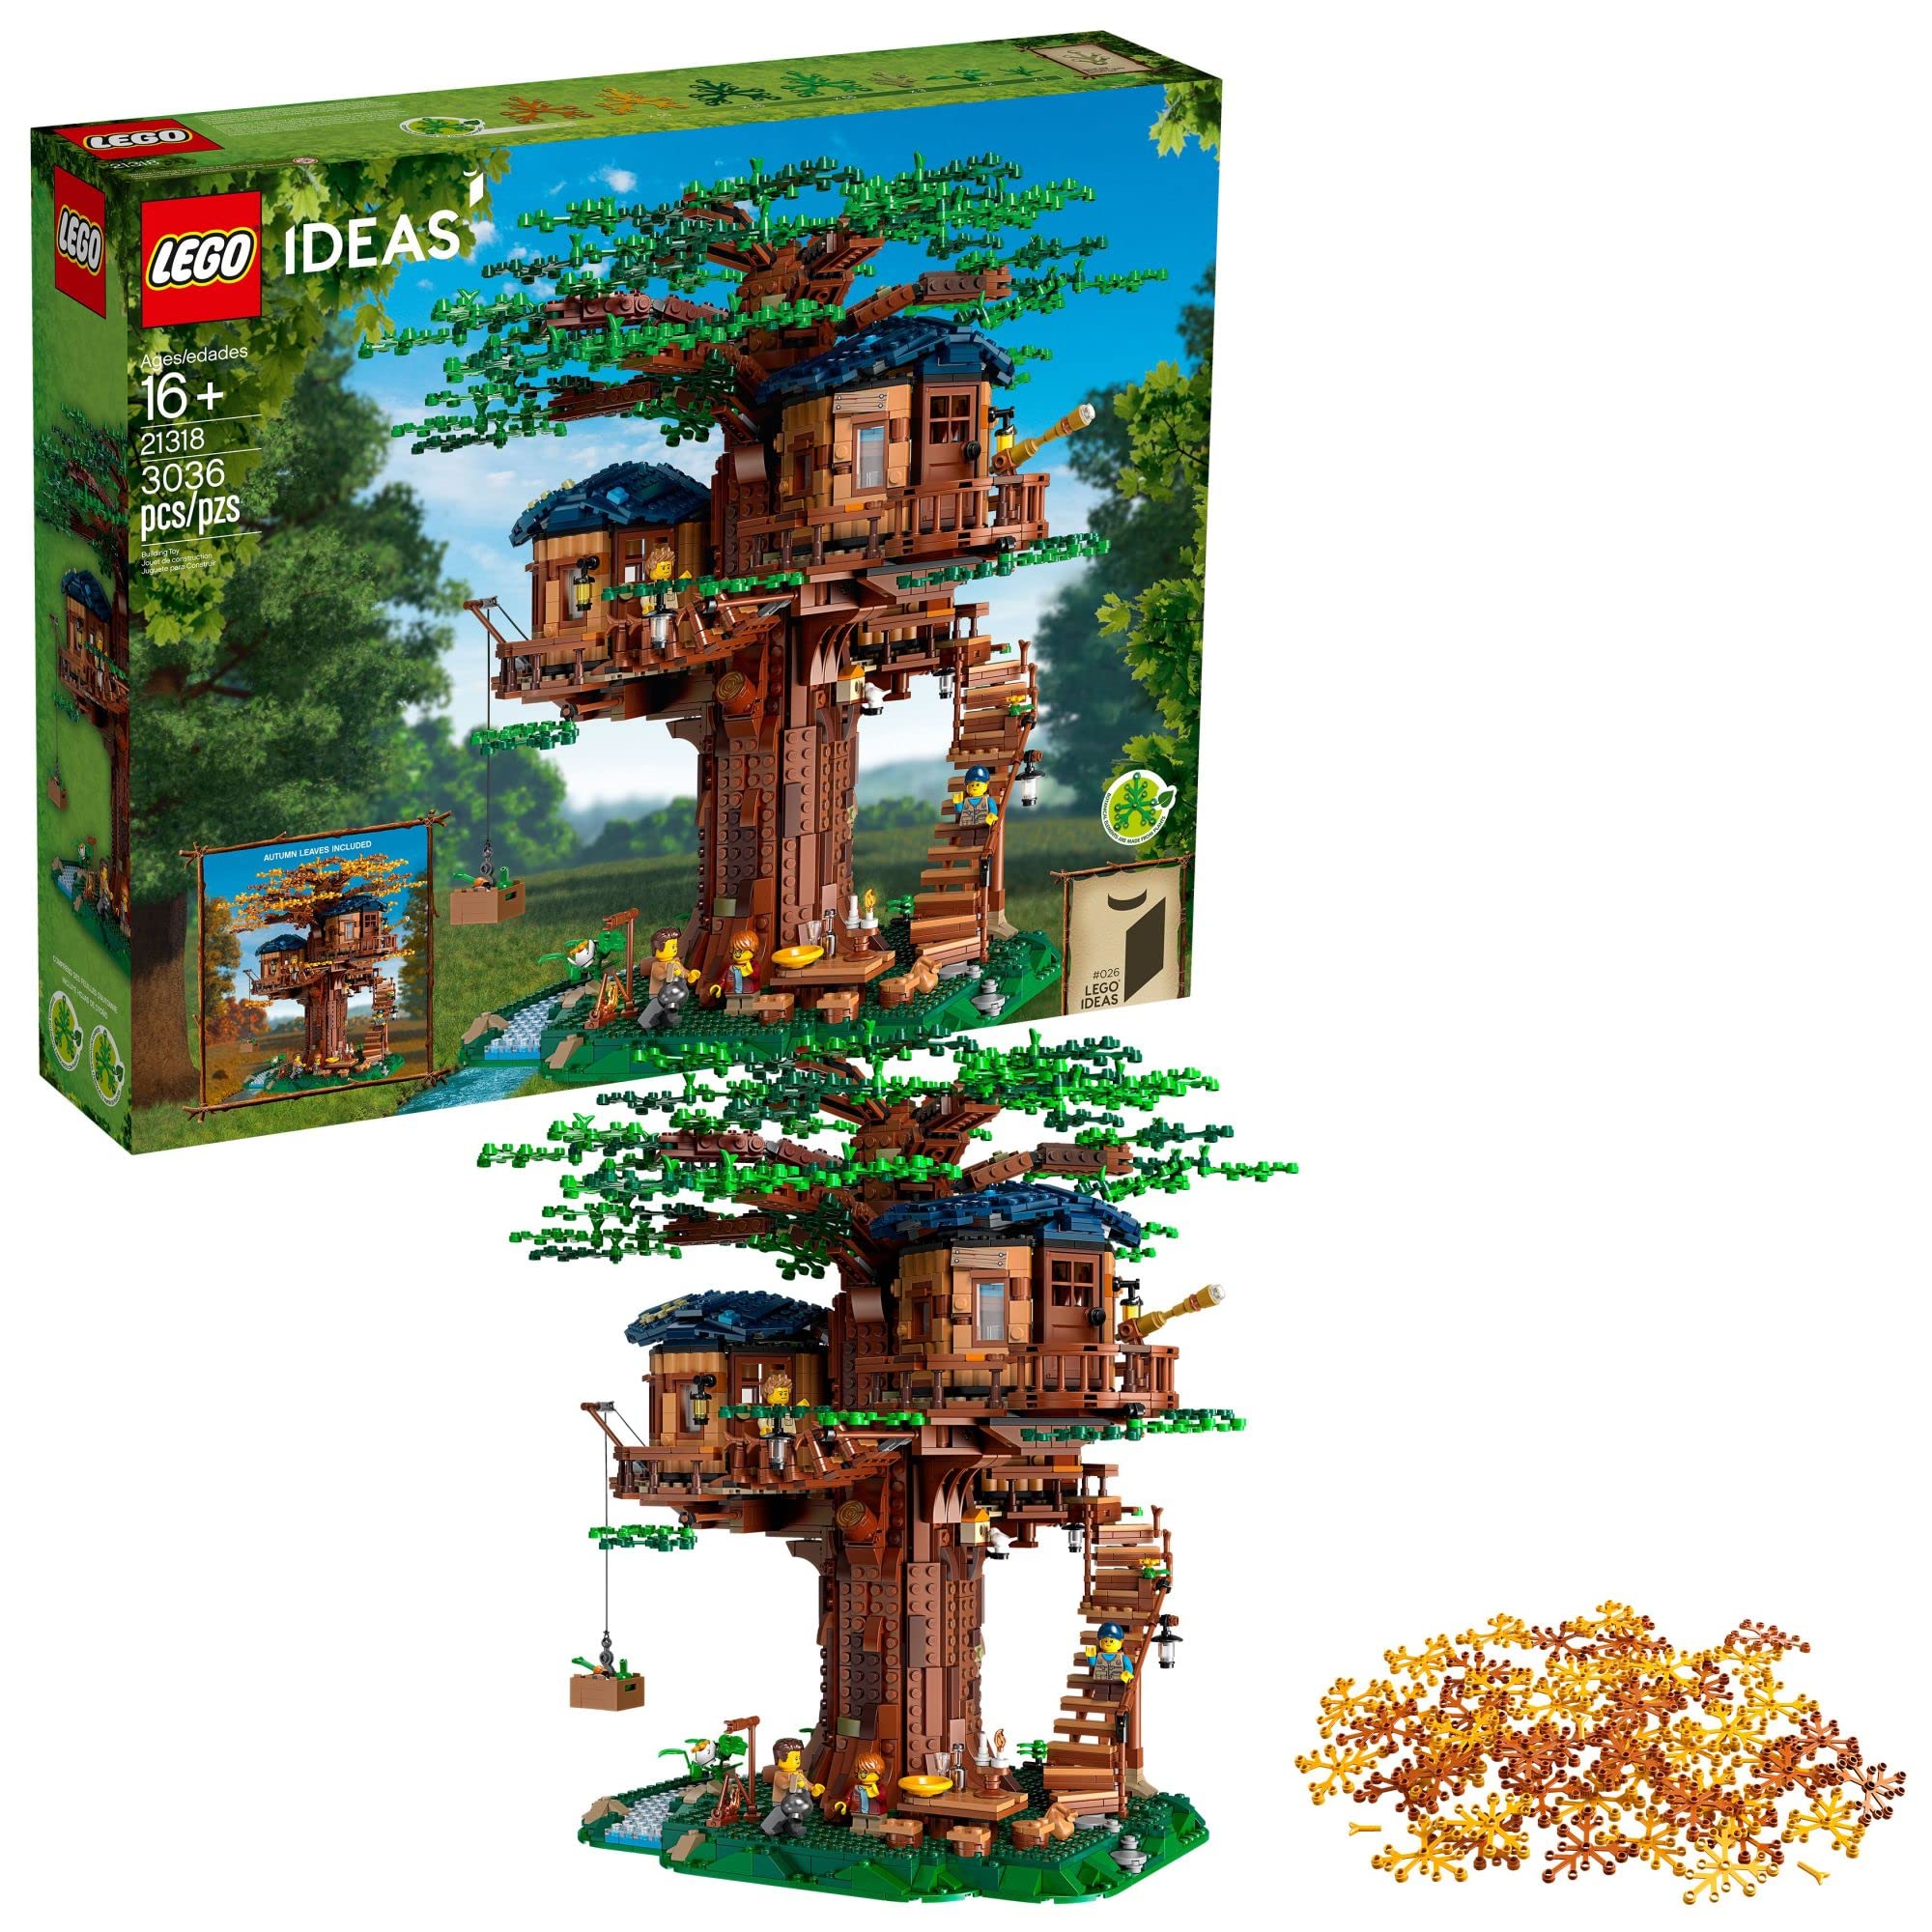 LEGO Ideas Tree House 21318, Model Construction Set for 16 Plus Year Olds with 3 Cabins, Interchangeable Leaves, Minifigures and a Bird Figure - $199.99